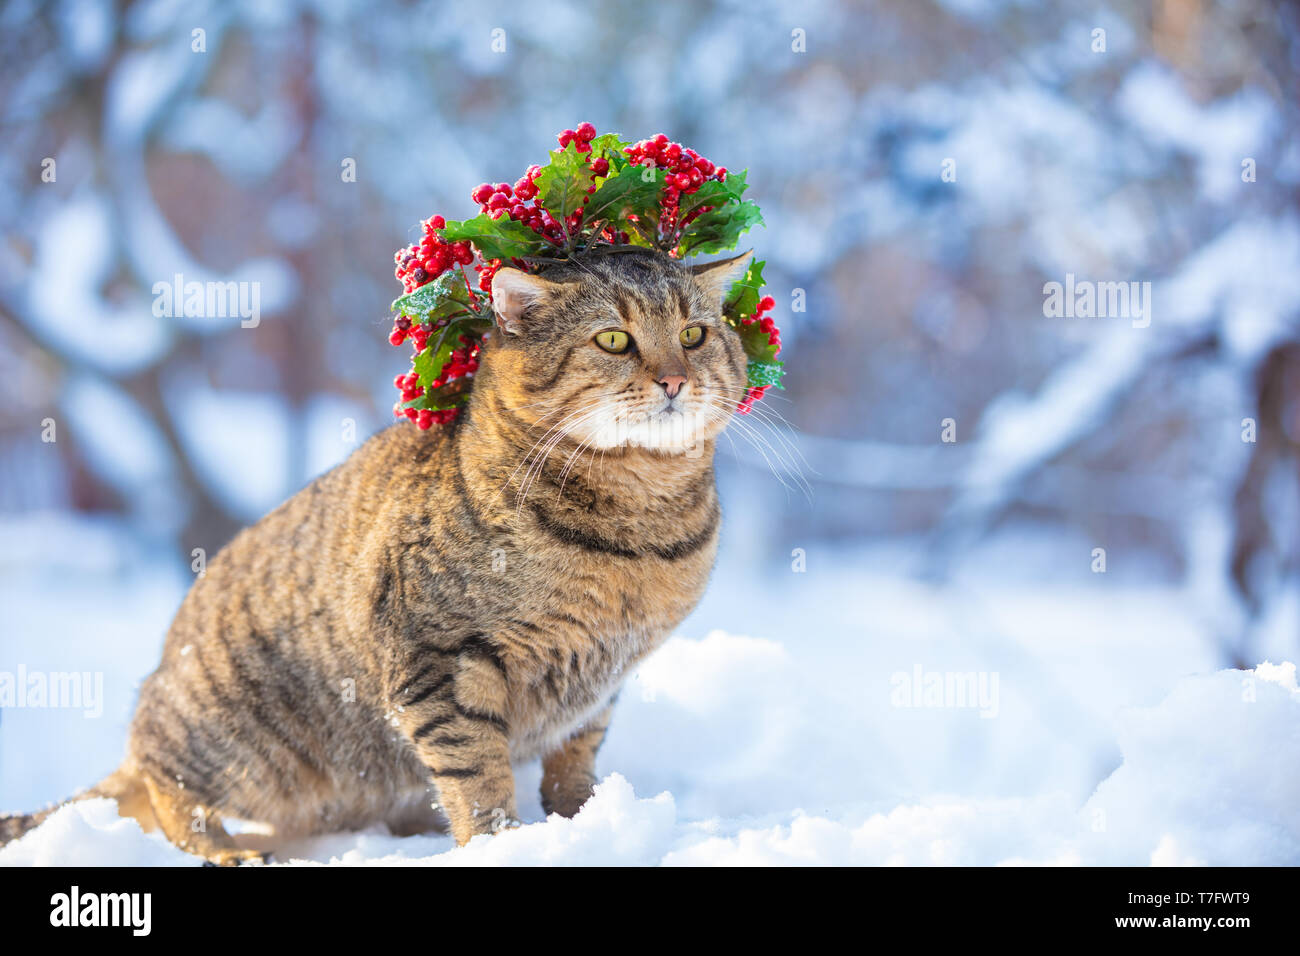 Cat wearing Christmas wreath walking on the snow in winter Stock Photo